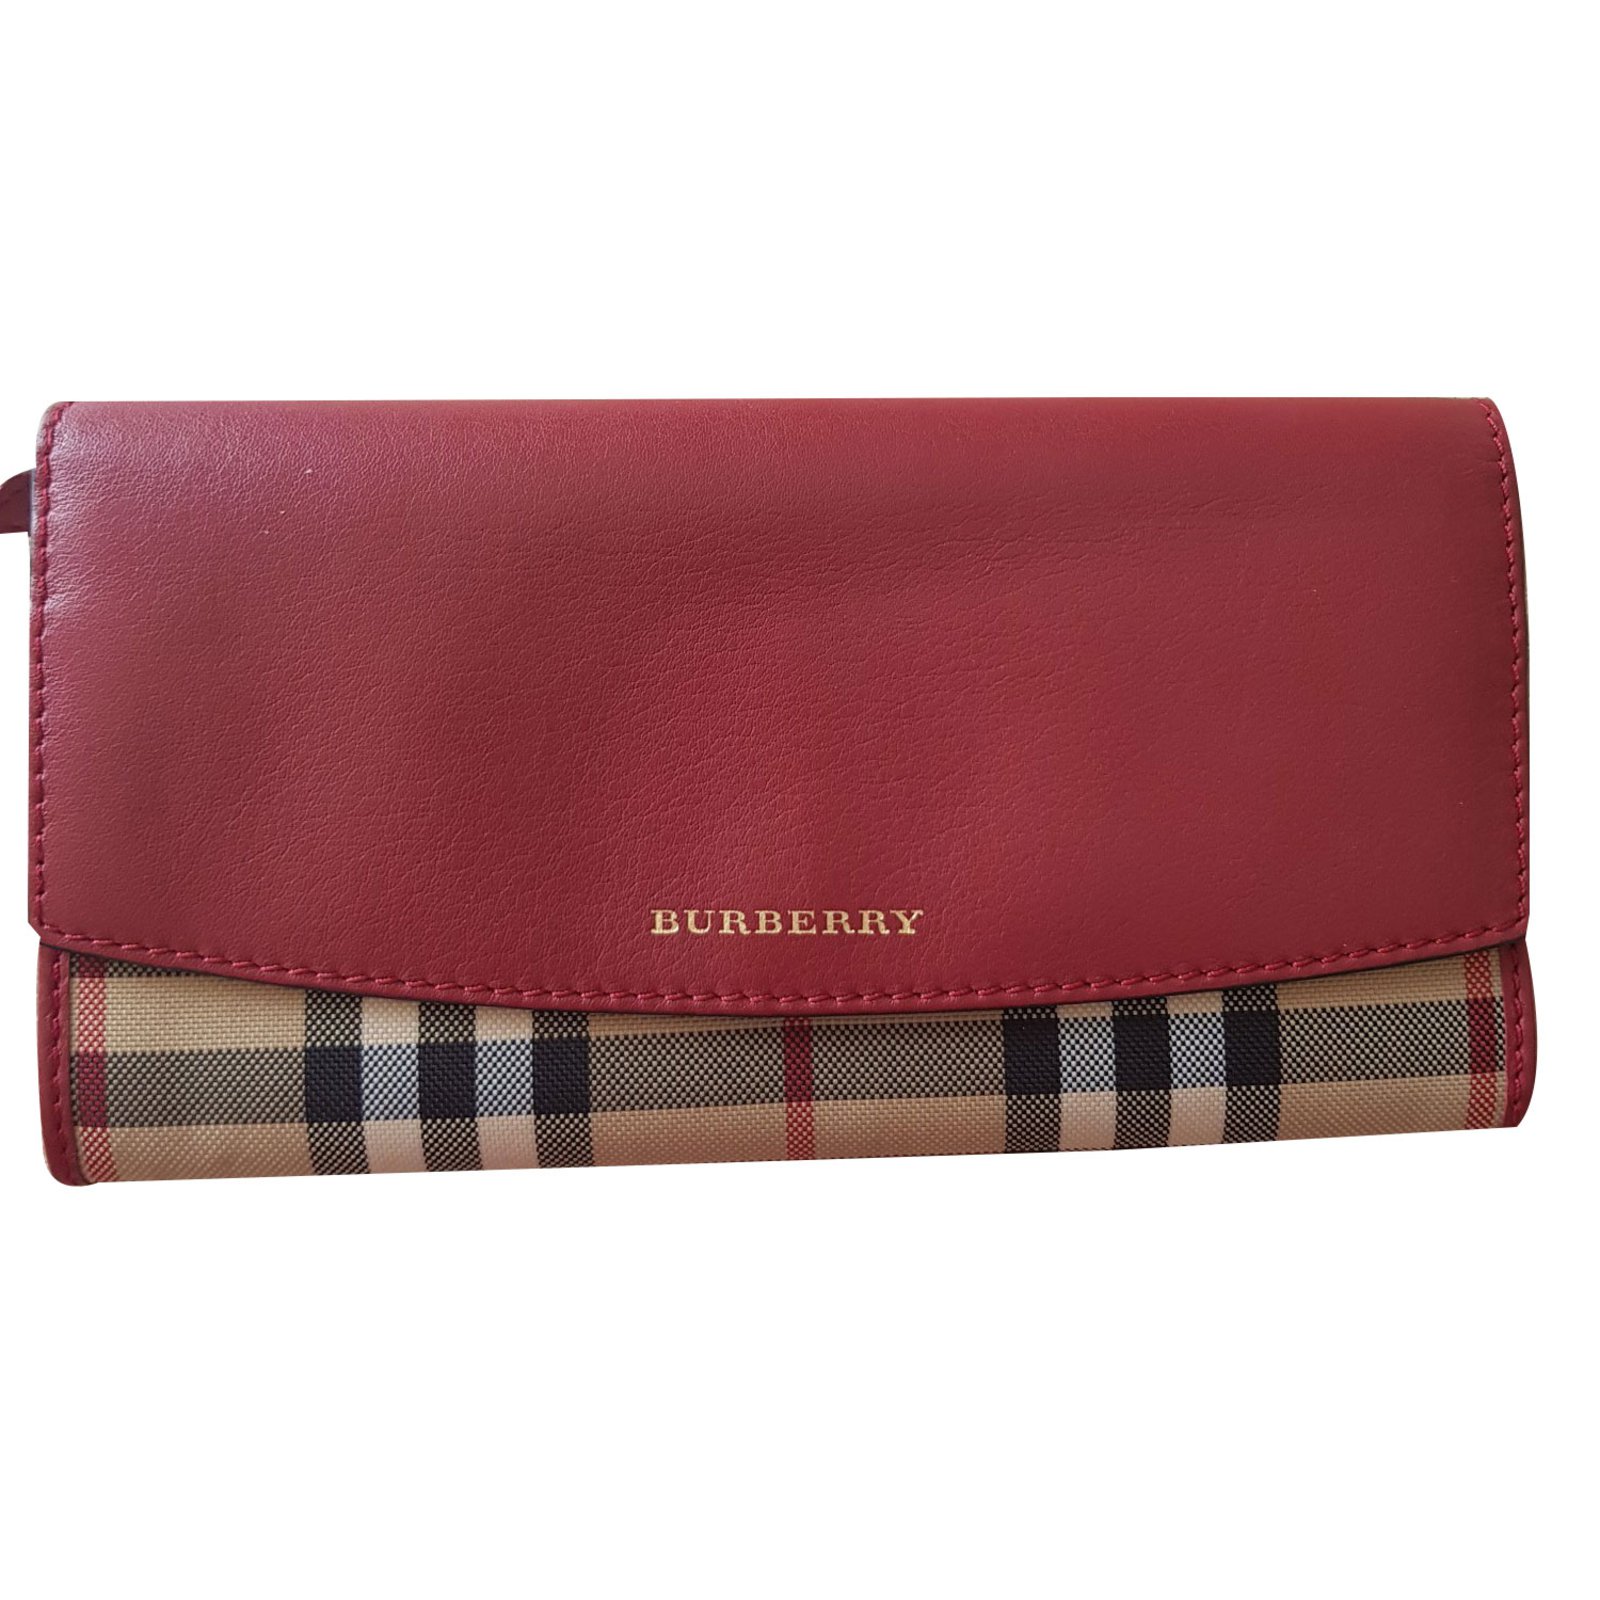 Burberry Wallets For Women | IUCN Water